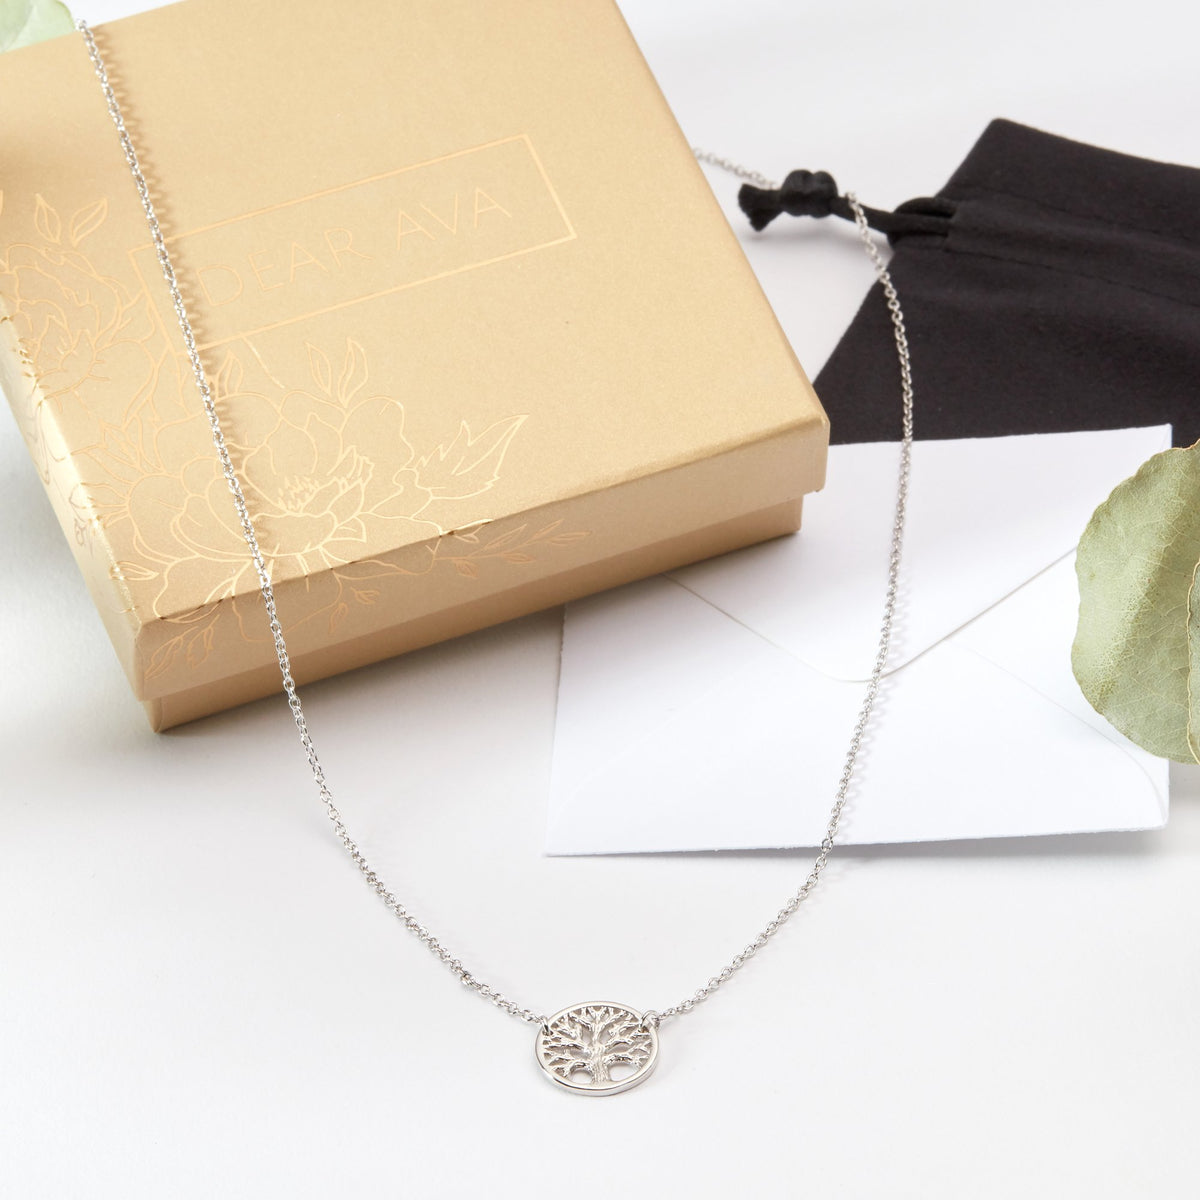 Christmas Gift for Mom Necklace - Dear Ava, Jewelry / Necklaces / Pendants